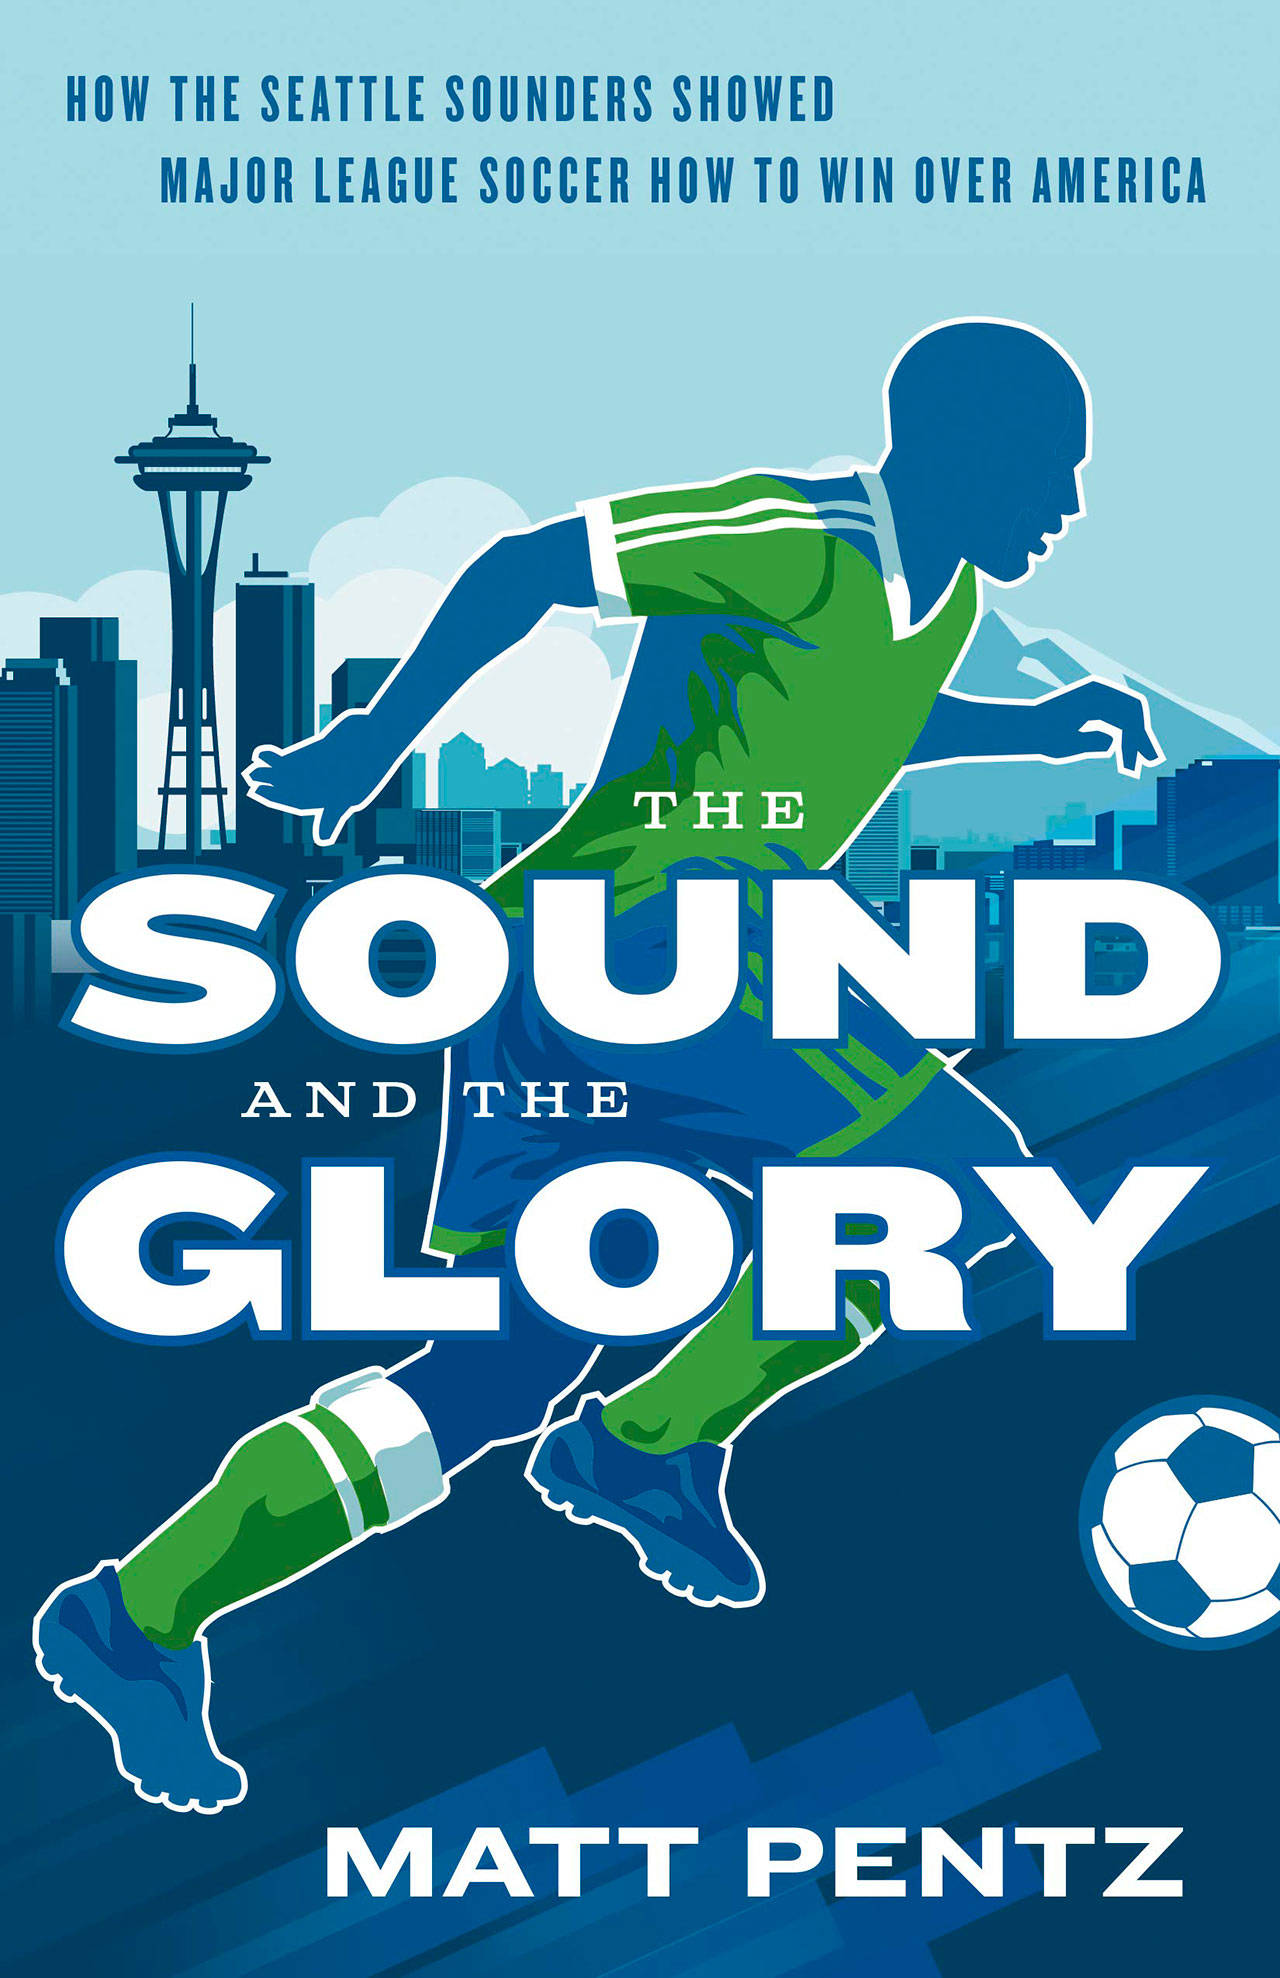 Image courtesy of Eagle Harbor Book Company | Seattle’s Matt Pentz will visit Eagle Harbor Book Company at 3 p.m. Sunday, March 17 to discuss his debut book, “The Sound and the Glory,” a comprehensive look at the Seattle Sounders franchise and its storied run for the MLS Cup.